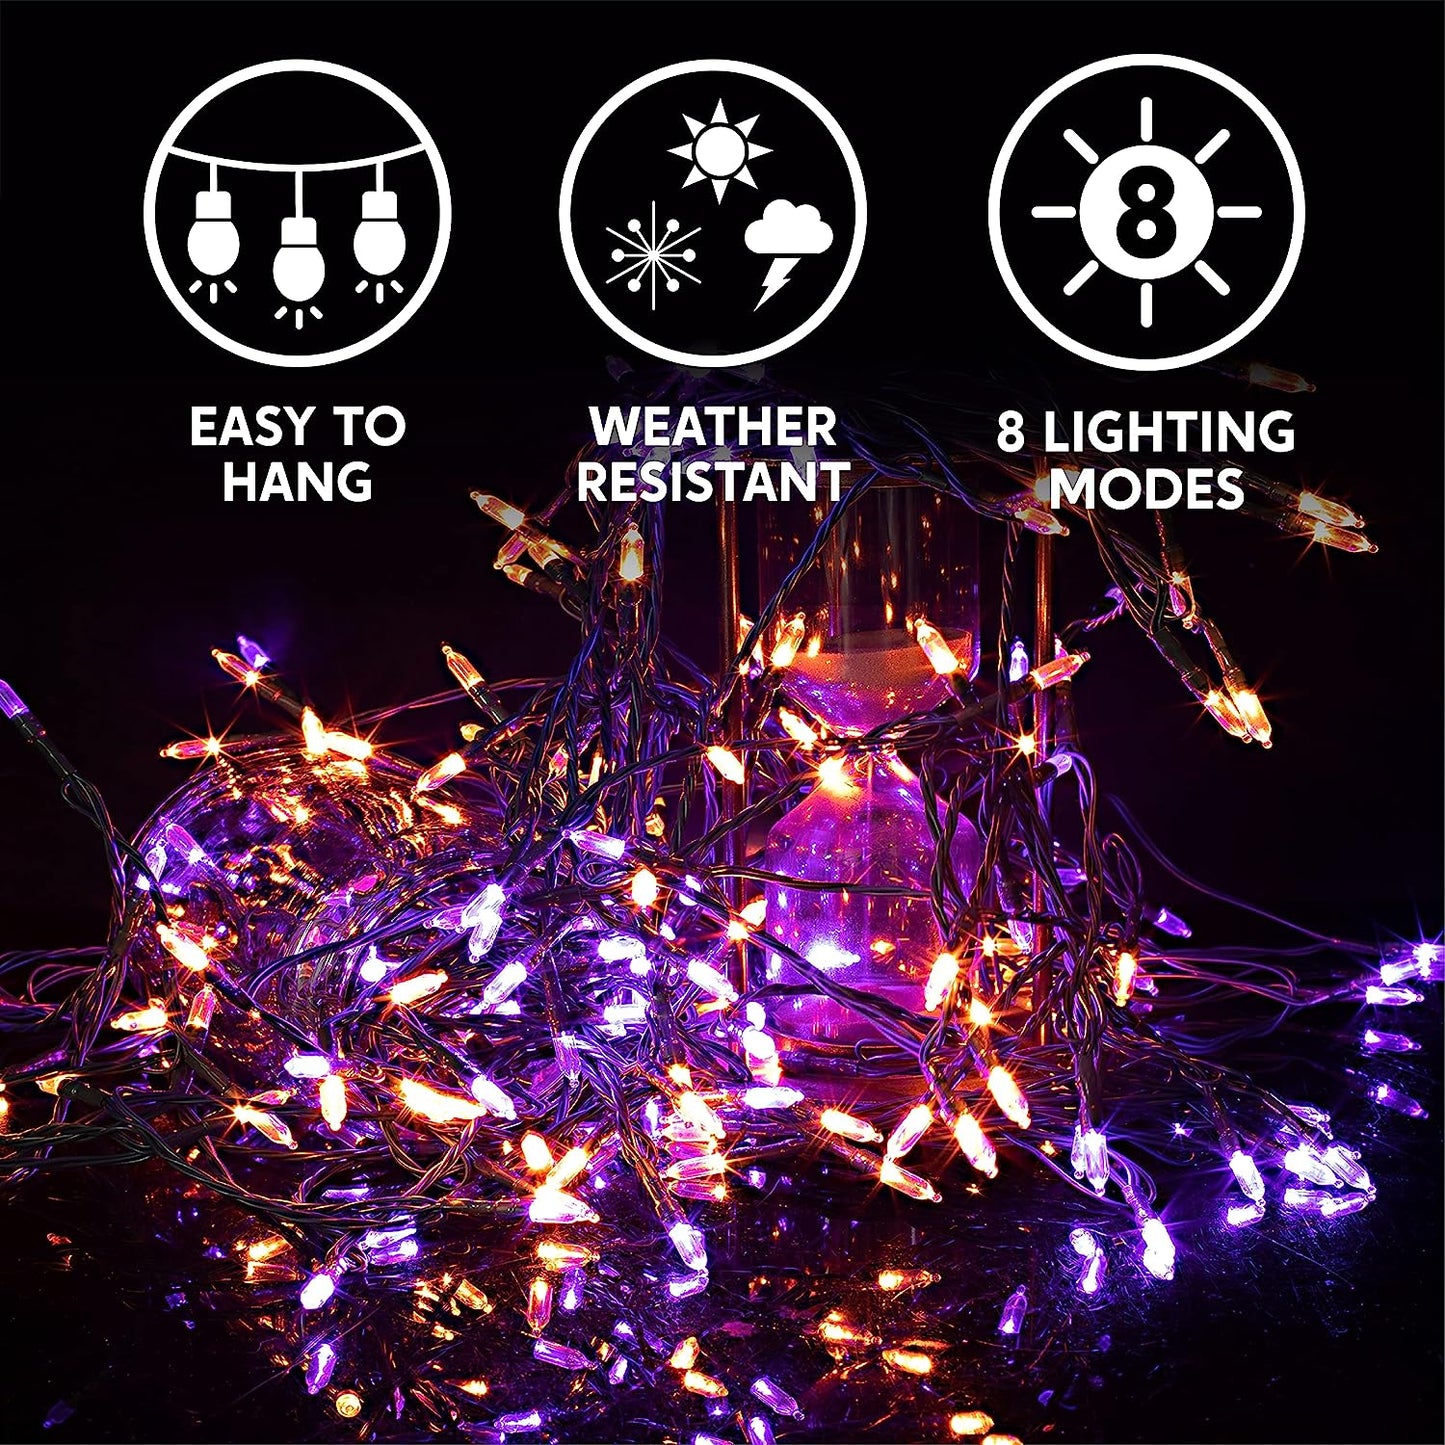 200-Count 67.3ft LED Orange & Purple Halloween String Lights with 8 Modes